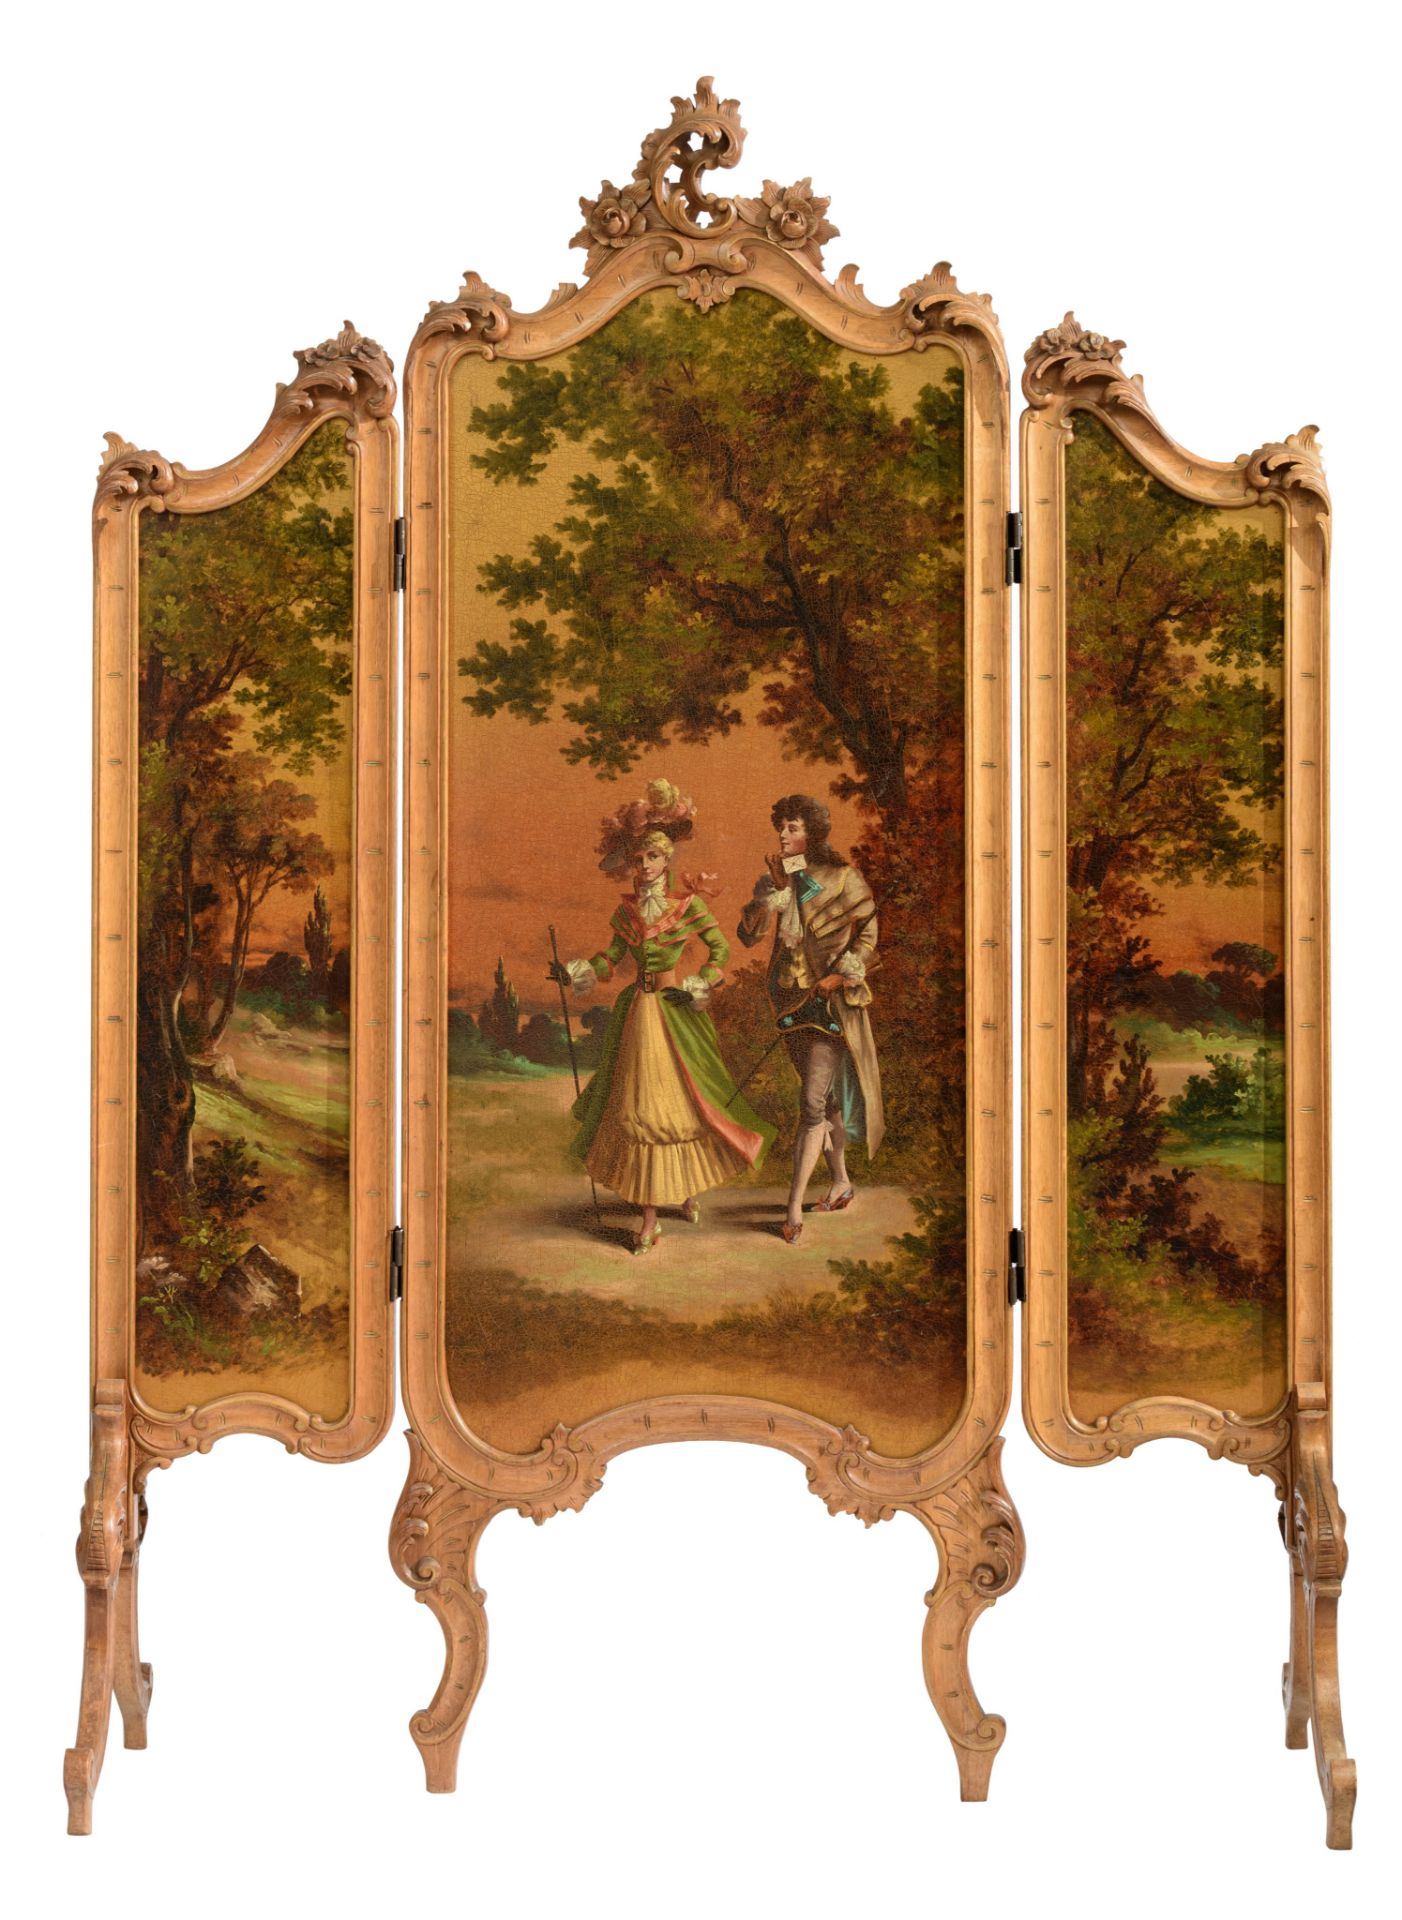 A Rococo style fire screen, with a romantic scene in the 'Vernis Martin' manner, H 148 - W 52 - 106